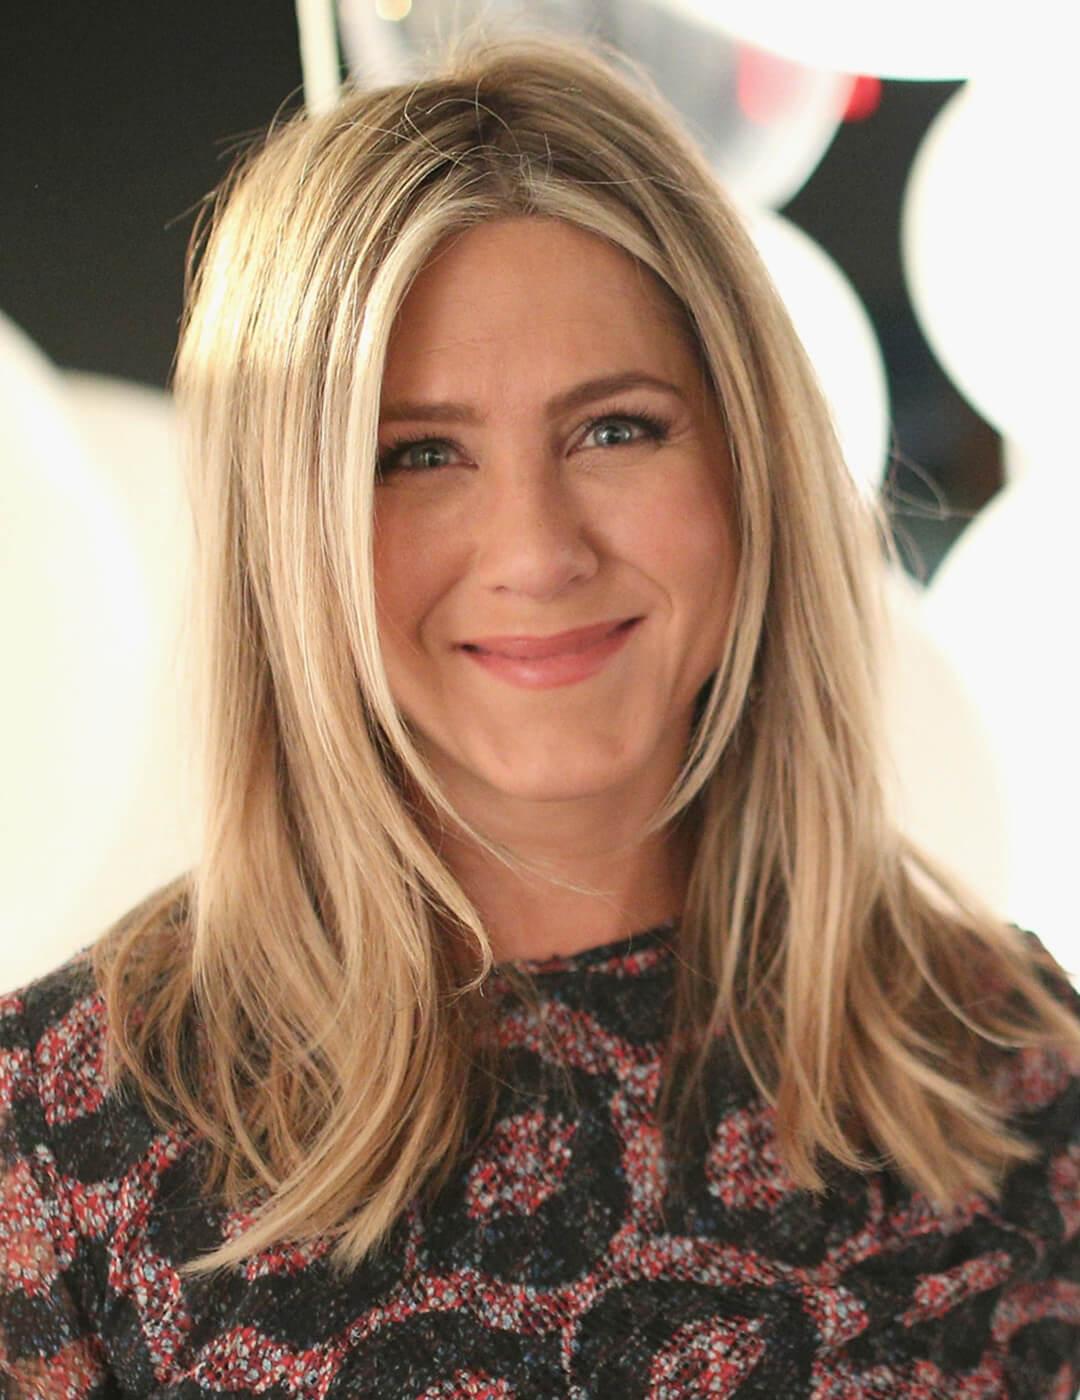 A photo of Jennifer Aniston with a face-framing layer hairstyle